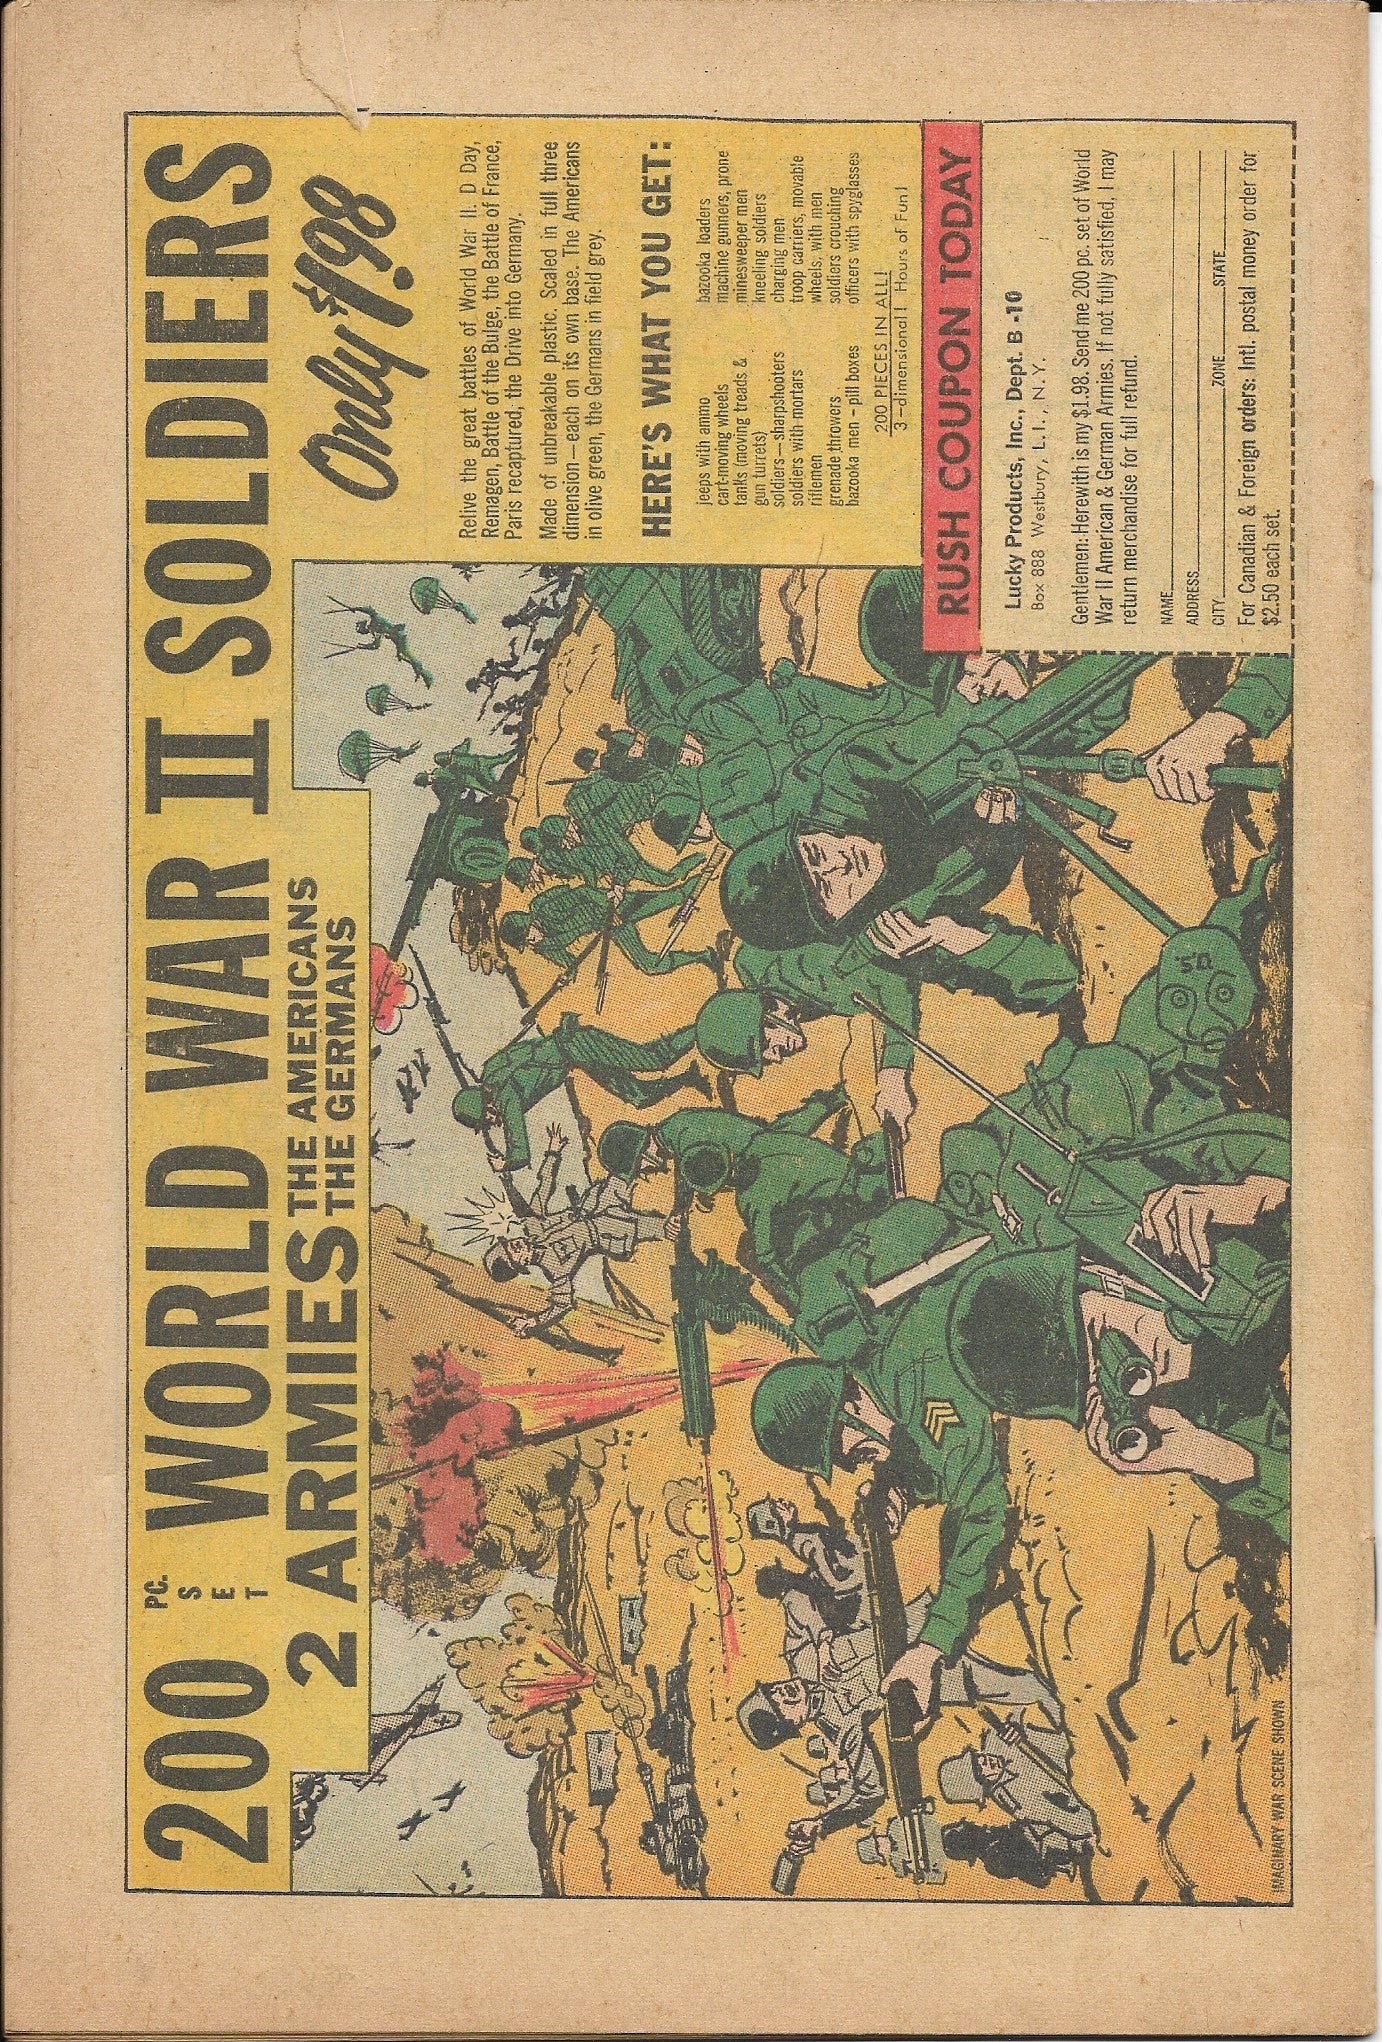 Jigsaw, Vol. 1, No. 1, Funday Funnies, Inc., September 1966, MISSING COVER